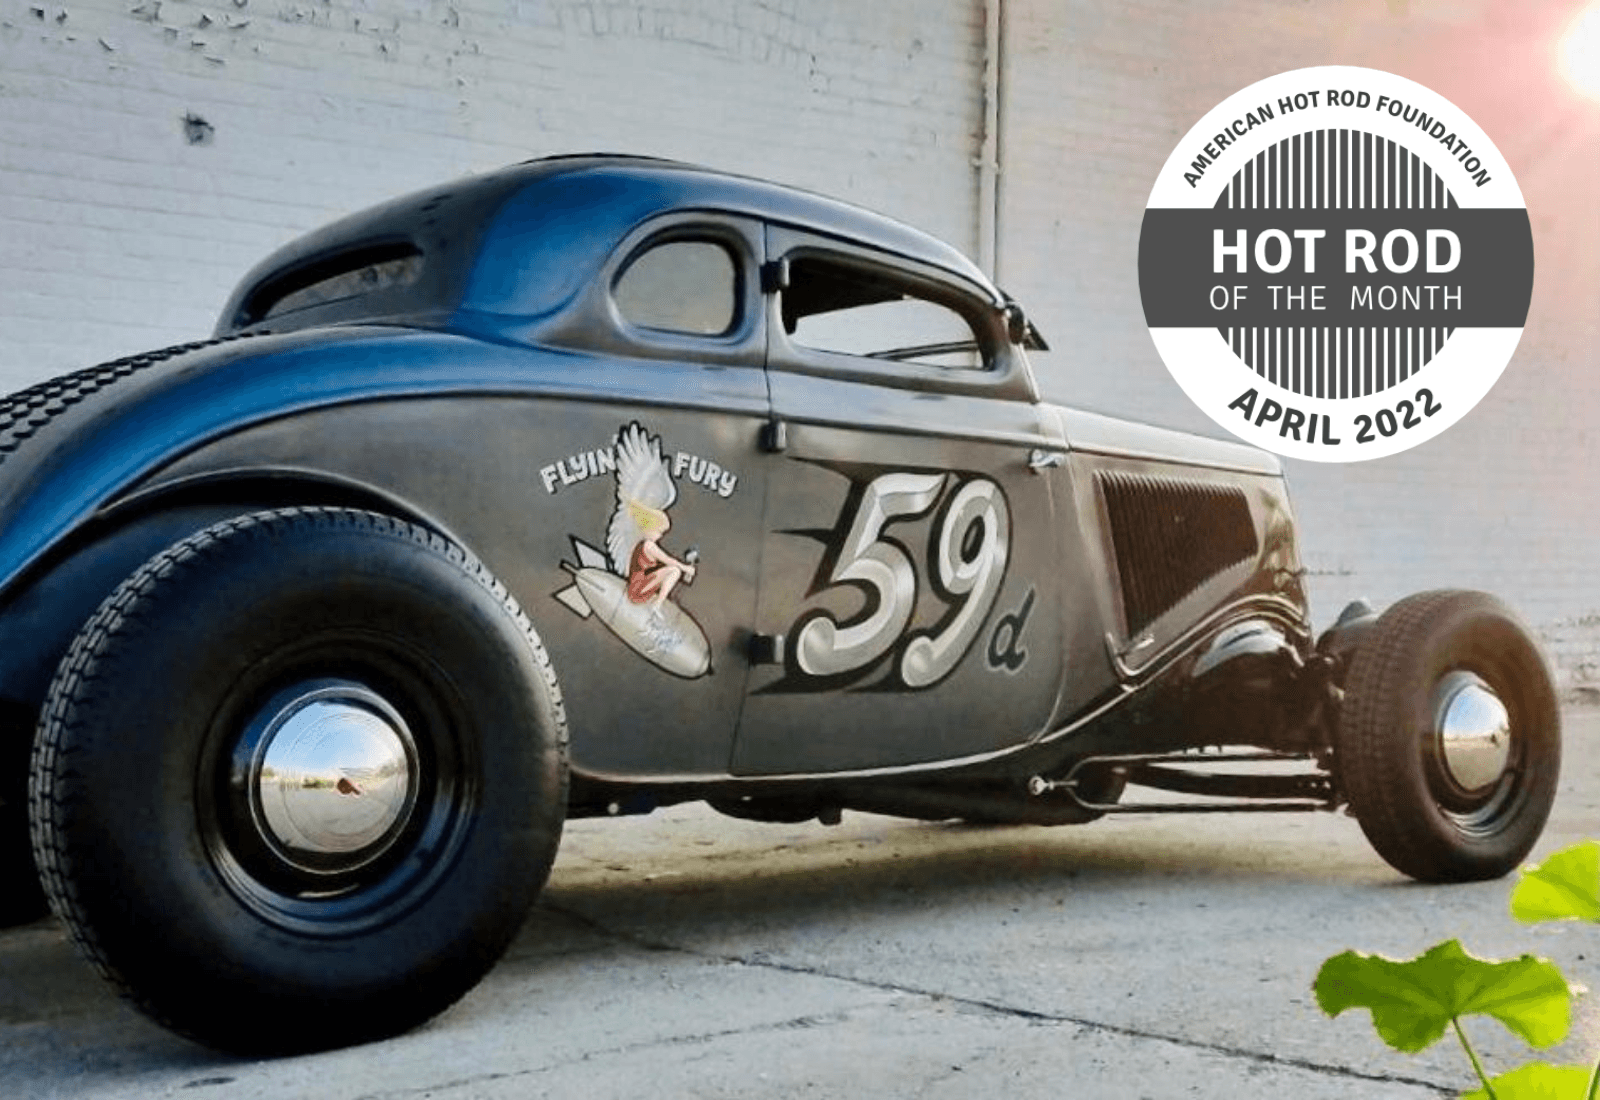 AHRF Hot Rod of the Month April 2022